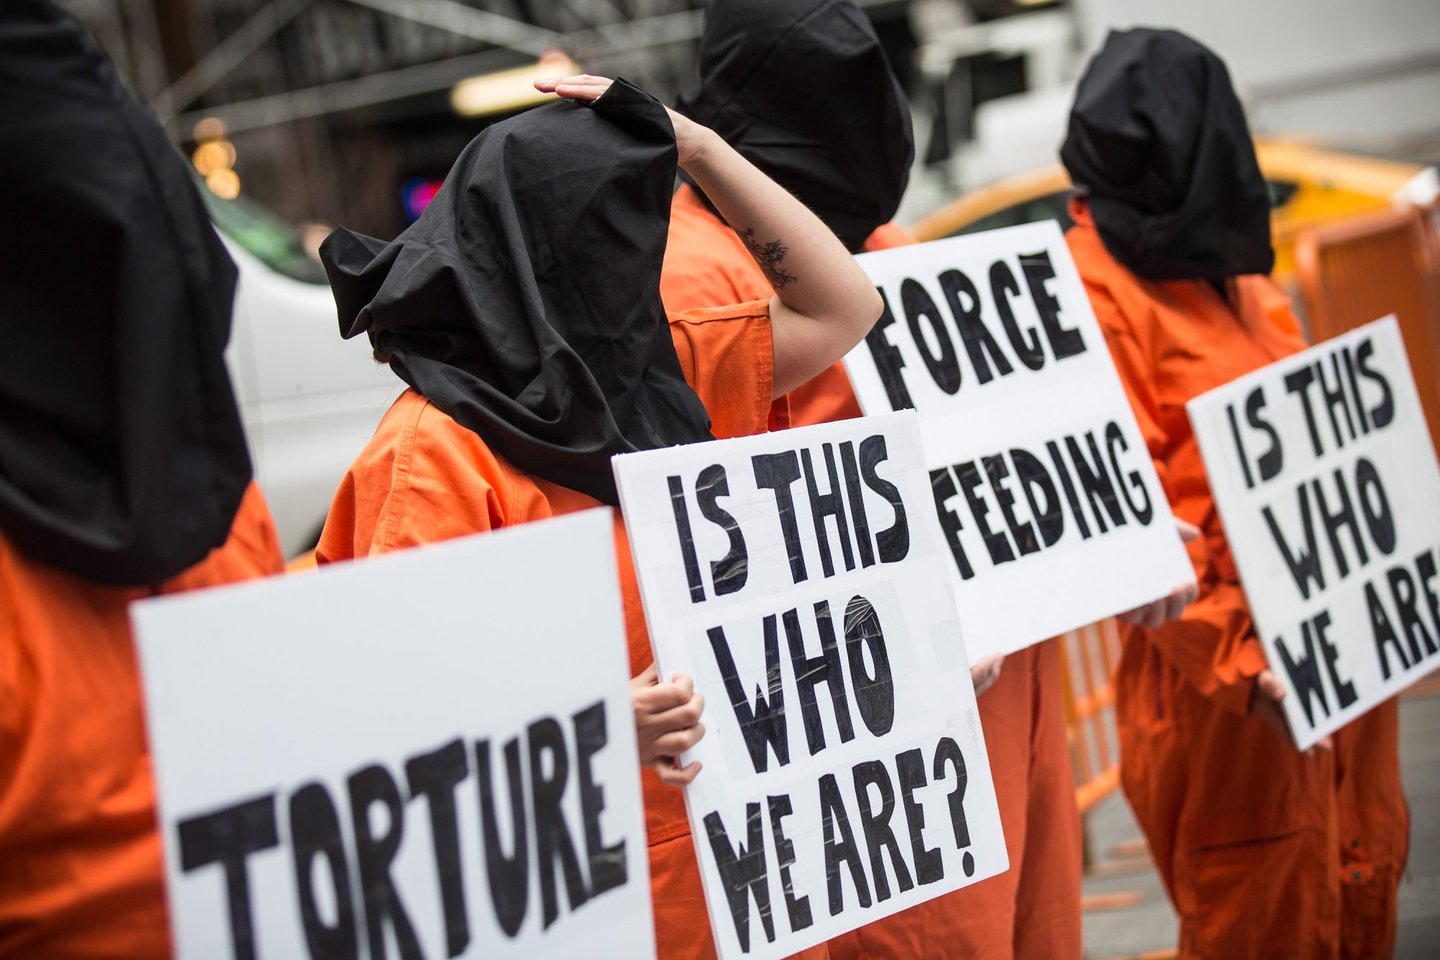 NEW YORK, NY - MAY 23: Protestors demand the closure of the Guantanamo Bay detention center, used by U.S. military forces to hold people indefinitely, in Times Square on May 23, 2014 in New York City. Organizers of the protest claimed the gathering was in coordination with protests happening in 40 other cities. (Photo by Andrew Burton/Getty Images)